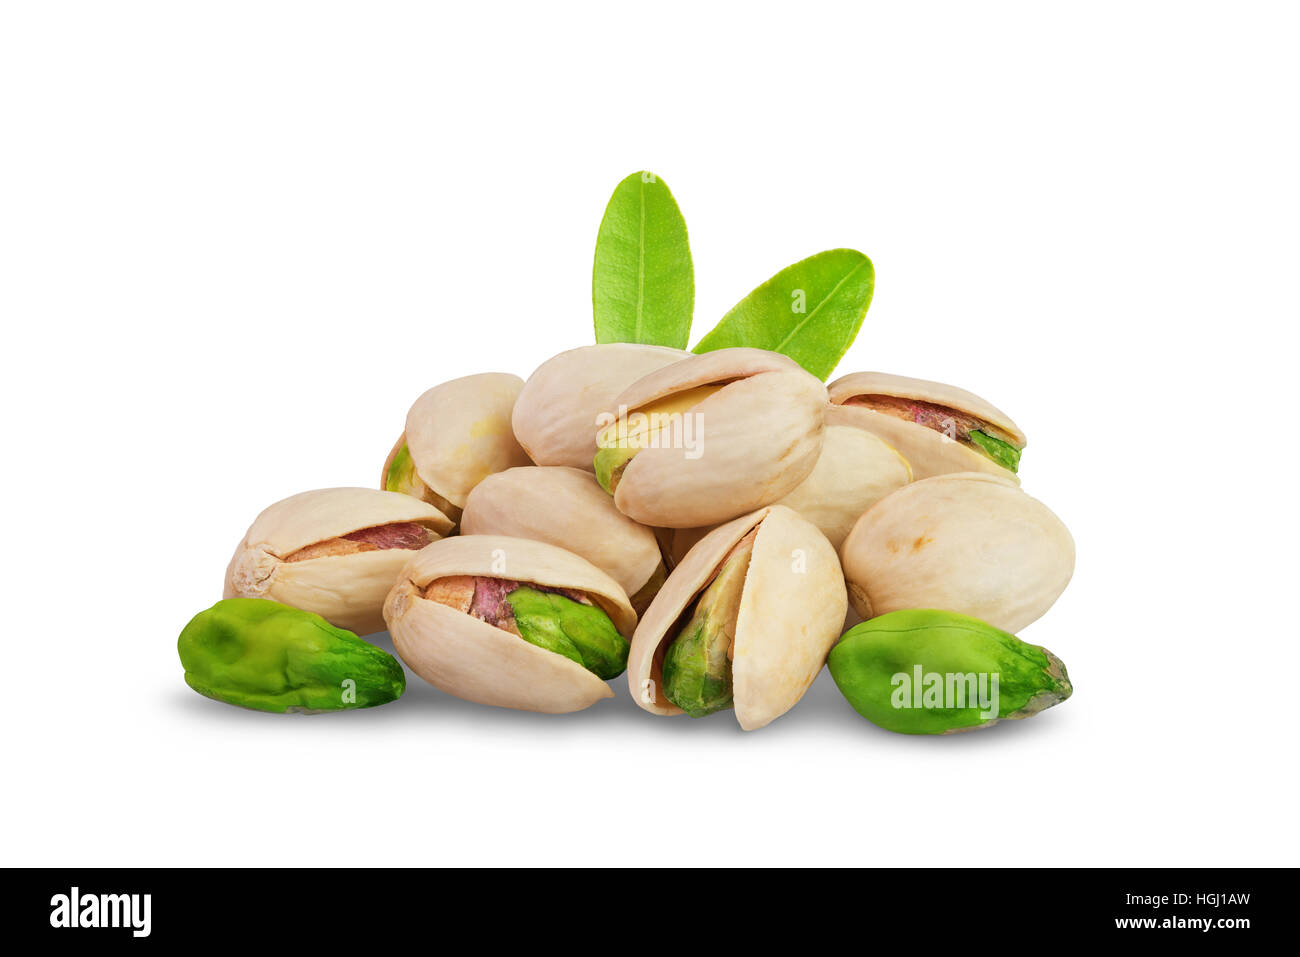 Pistachio nuts with leaf isolated on white background Stock Photo